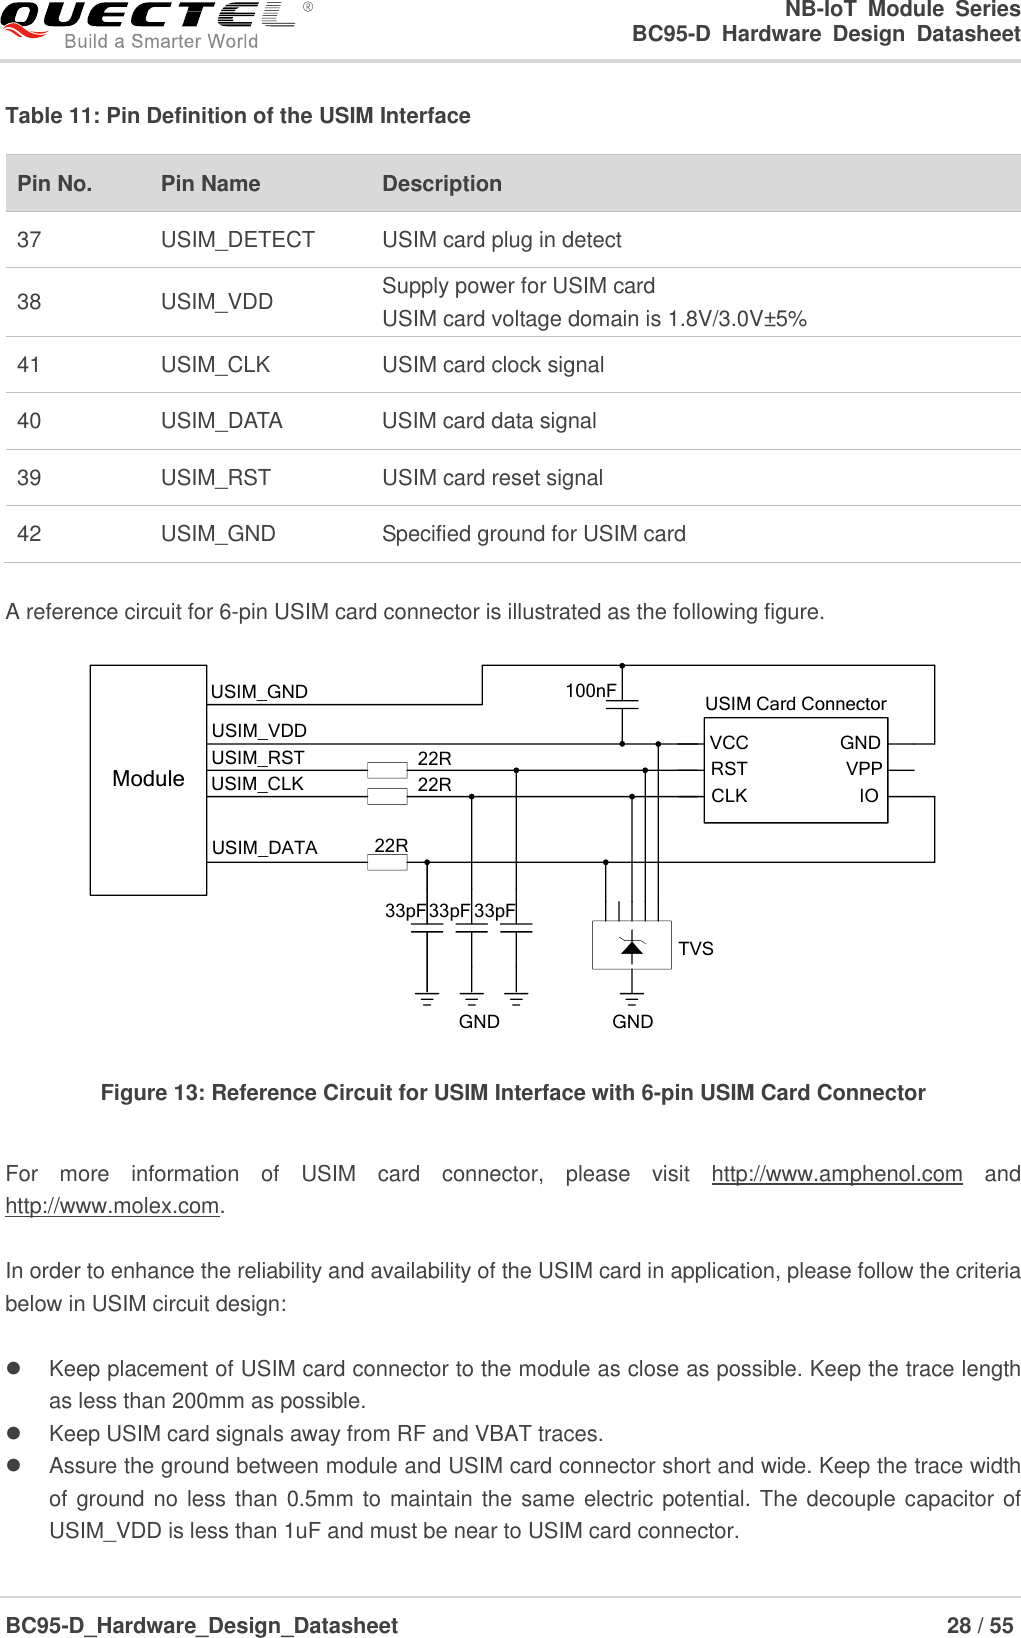                                                            NB-IoT  Module  Series                                                          BC95-D  Hardware  Design  Datasheet BC95-D_Hardware_Design_Datasheet                                                                    28 / 55    Table 11: Pin Definition of the USIM Interface  A reference circuit for 6-pin USIM card connector is illustrated as the following figure. ModuleUSIM_VDDUSIM_GNDUSIM_RSTUSIM_CLKUSIM_DATA 22R22R22R100nF USIM Card ConnectorGNDTVS33pF33pF 33pFVCCRSTCLK IOVPPGNDGND Figure 13: Reference Circuit for USIM Interface with 6-pin USIM Card Connector  For  more  information  of  USIM  card  connector,  please  visit  http://www.amphenol.com  and http://www.molex.com.  In order to enhance the reliability and availability of the USIM card in application, please follow the criteria below in USIM circuit design:    Keep placement of USIM card connector to the module as close as possible. Keep the trace length as less than 200mm as possible.   Keep USIM card signals away from RF and VBAT traces.   Assure the ground between module and USIM card connector short and wide. Keep the trace width of ground no less than 0.5mm to maintain the same electric potential. The decouple capacitor of USIM_VDD is less than 1uF and must be near to USIM card connector.     Pin No. Pin Name Description 37 USIM_DETECT USIM card plug in detect 38 USIM_VDD Supply power for USIM card USIM card voltage domain is 1.8V/3.0V±5% 41 USIM_CLK USIM card clock signal 40 USIM_DATA USIM card data signal 39 USIM_RST USIM card reset signal 42 USIM_GND Specified ground for USIM card   